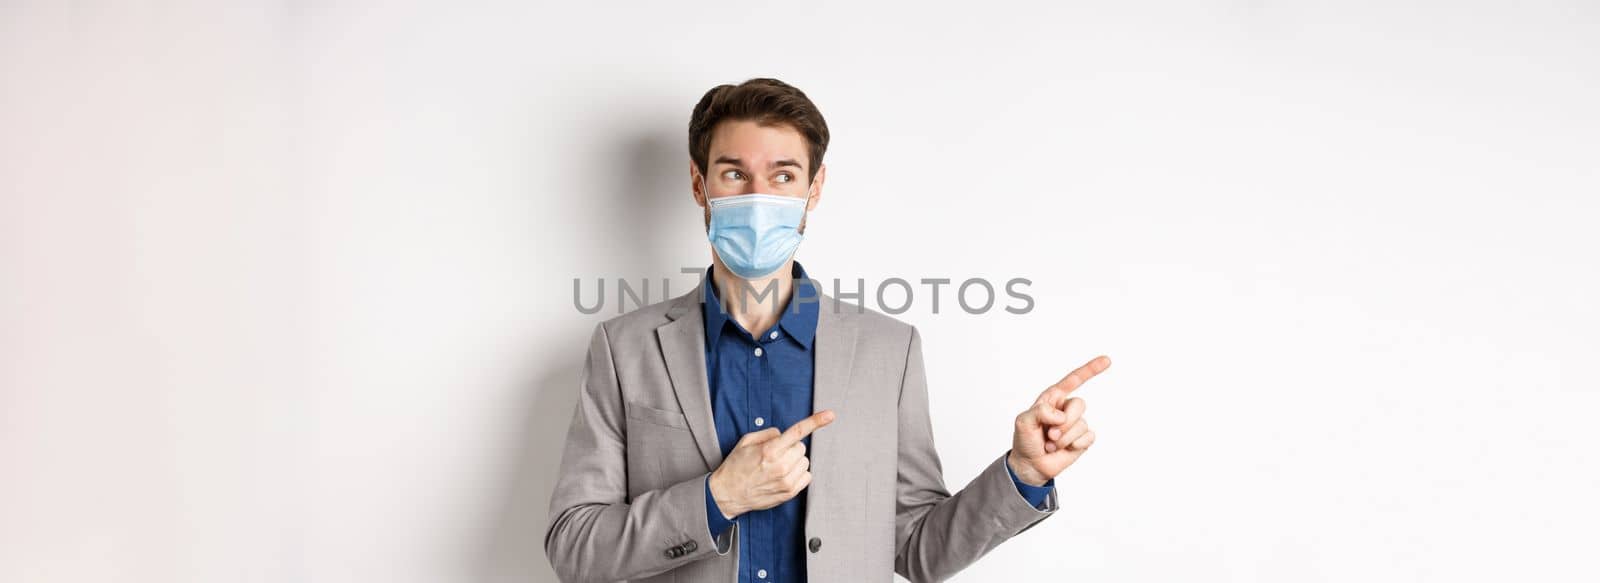 Covid-19, pandemic and business concept. Excited young man in medical mask and suit looking left, pointing at logo with pleased face, white background.